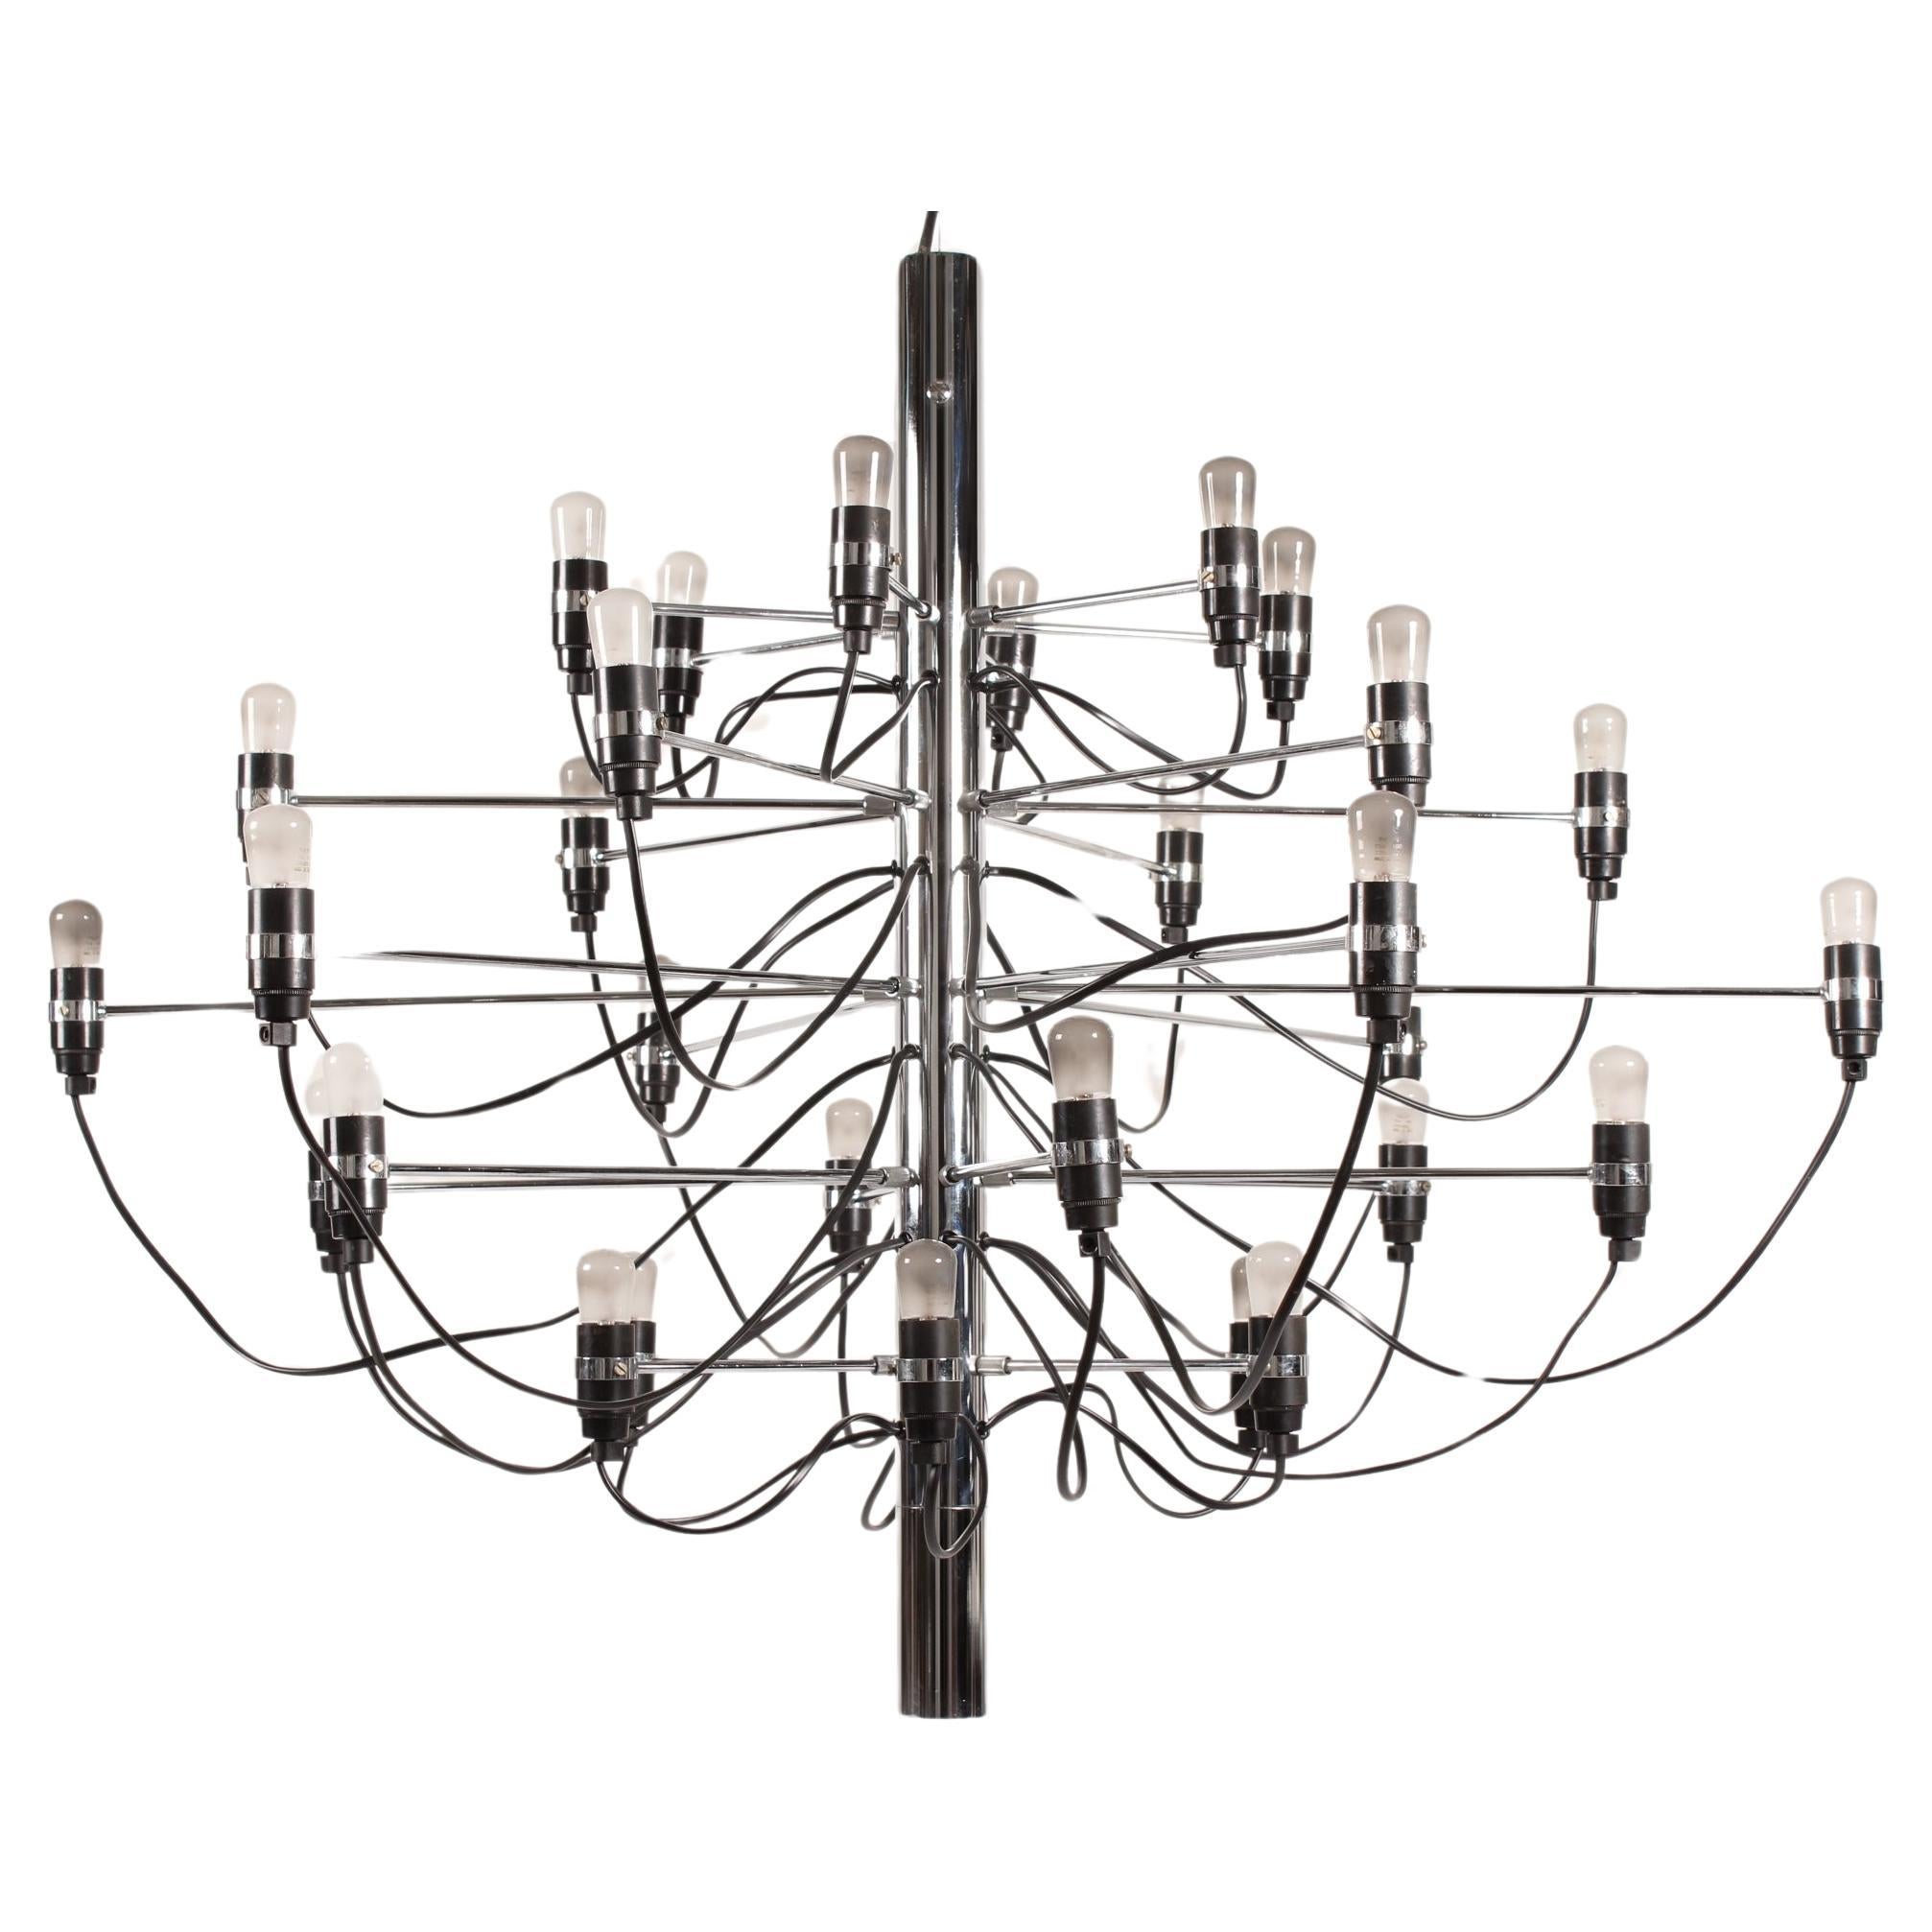 Large Gino Sarfatti 30 Armed Chrome Chandelier Model 2097 Made by Flos, 1980s For Sale